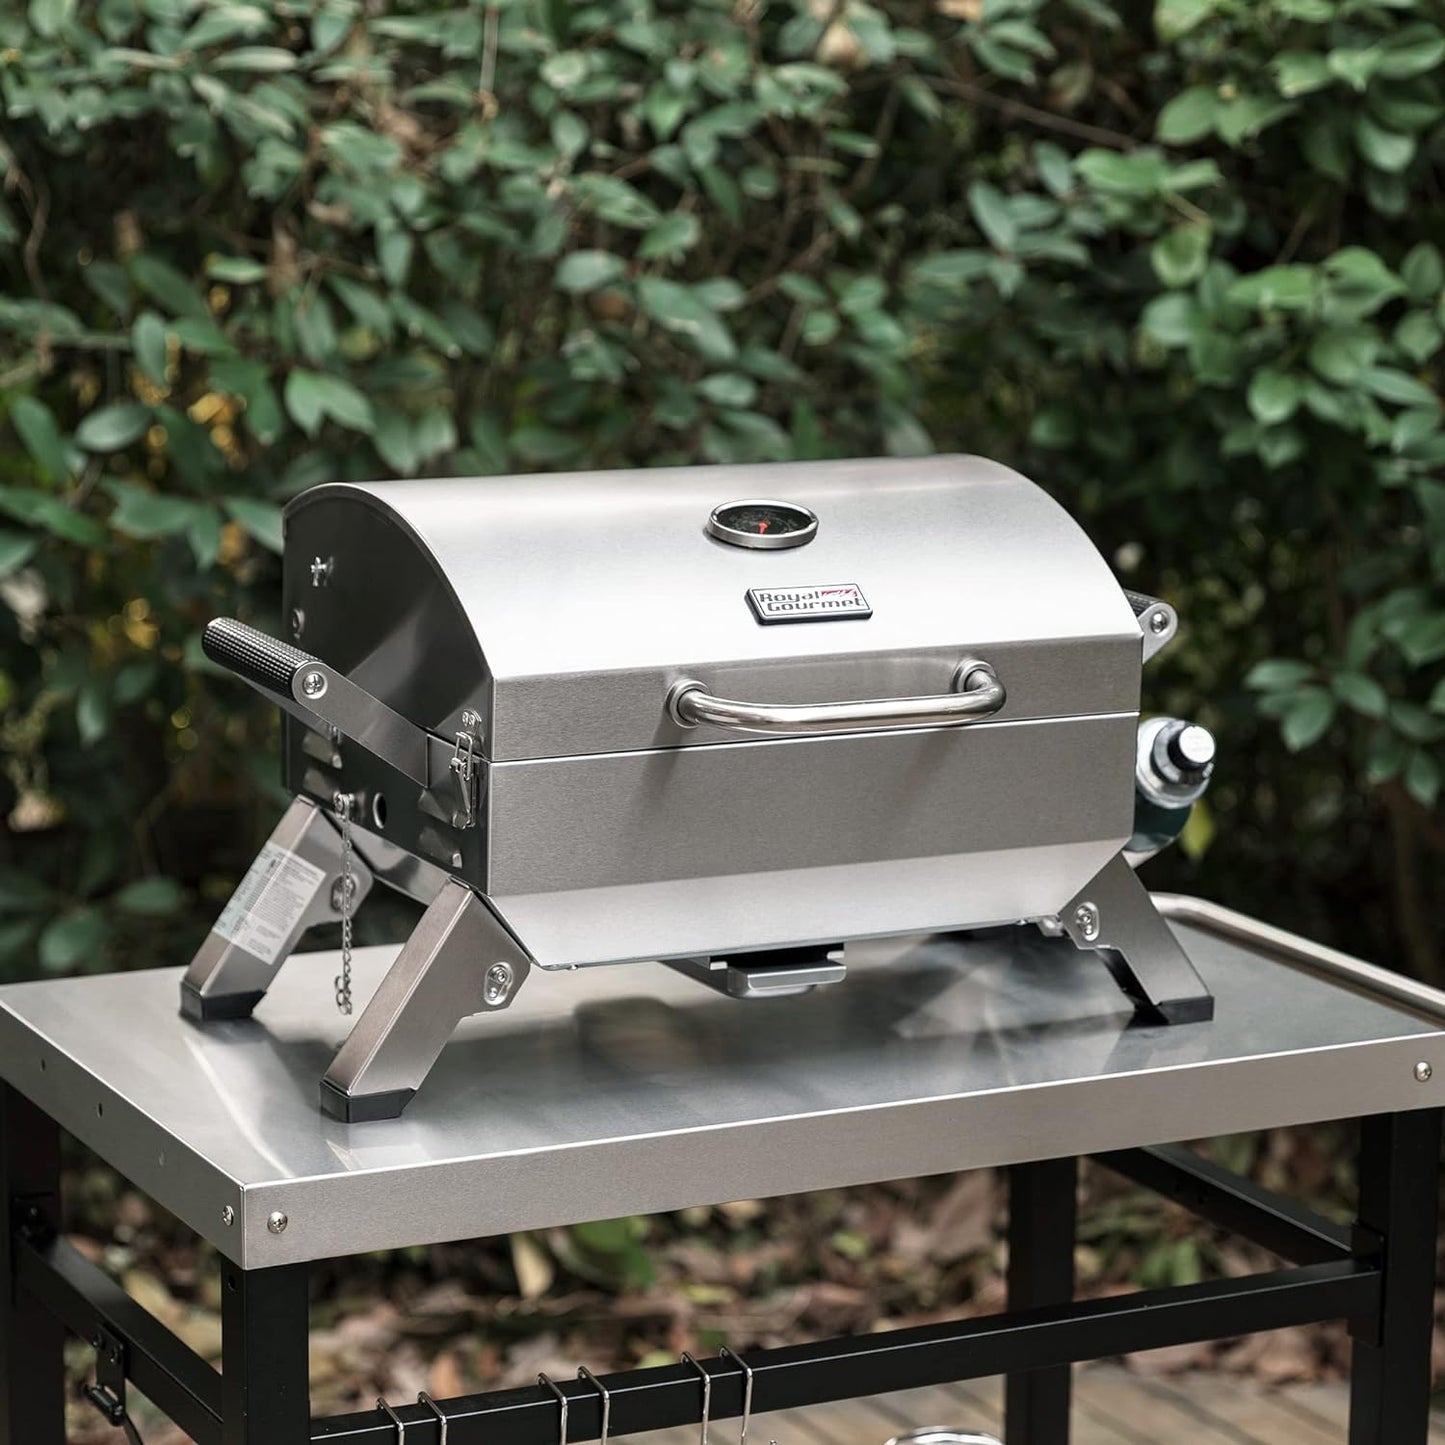 Stainless Steel Portable Grill with Two Handles and Travel Locks, Tabletop Propane Gas Grill with Folding Legs, 10000 BTU, for Picnic Cookout, GT2001, Silver